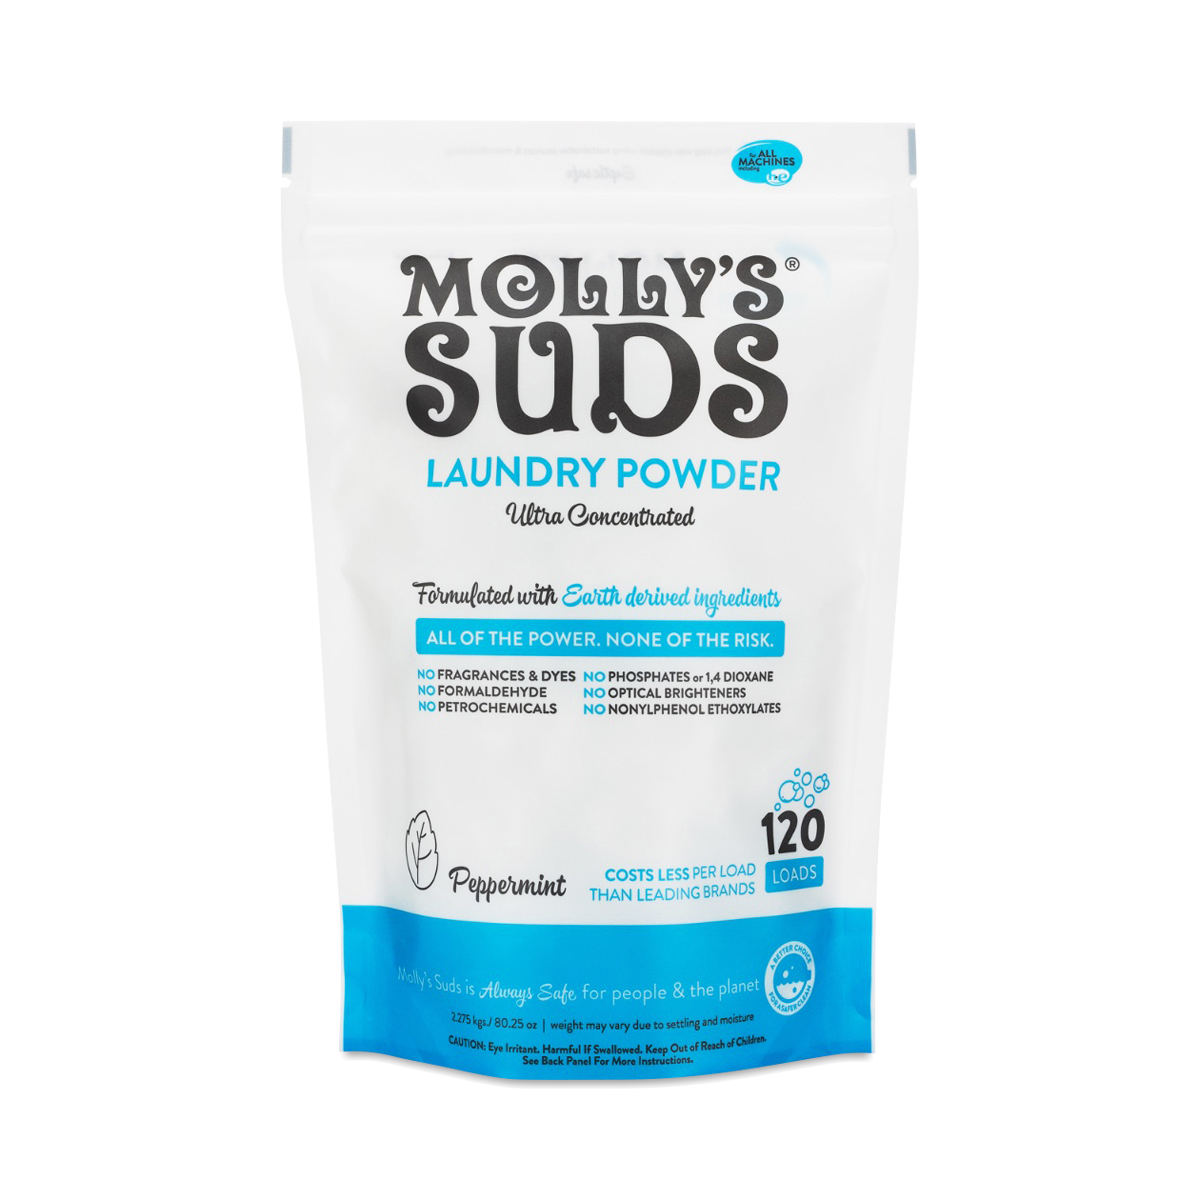 Molly's Suds Laundry Powder, Peppermint 120 loads